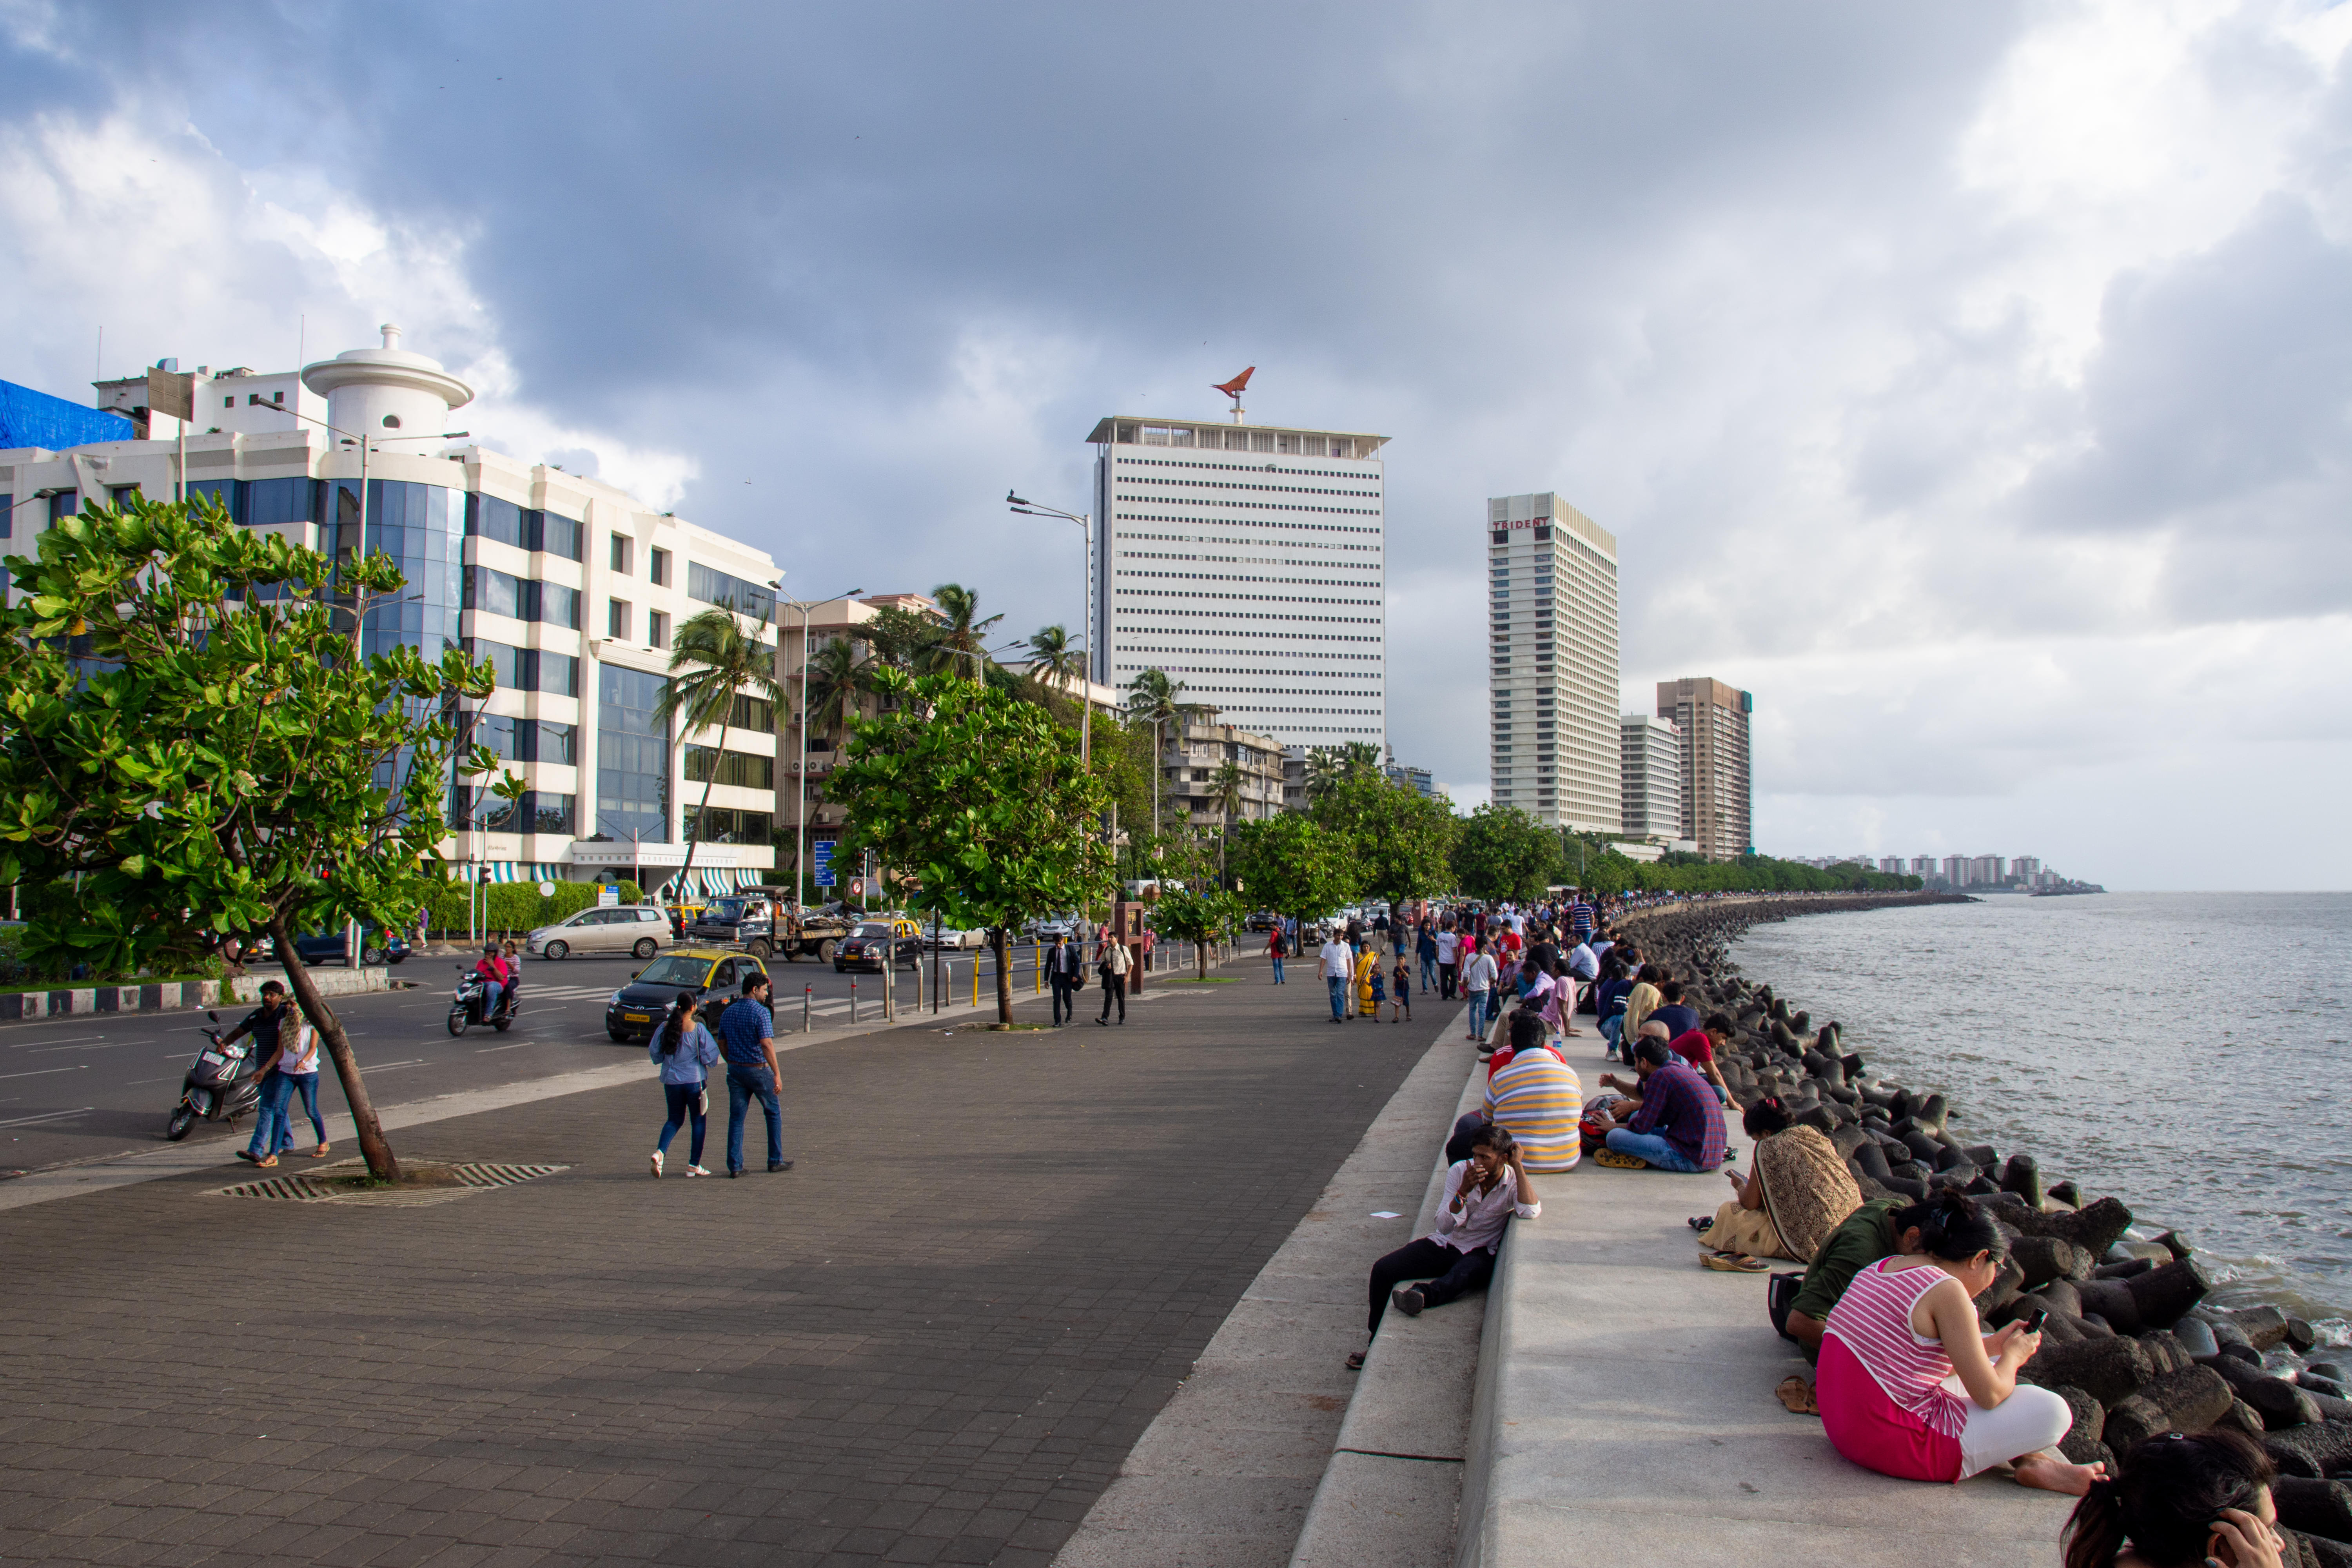 Things to Do at Marine Drive